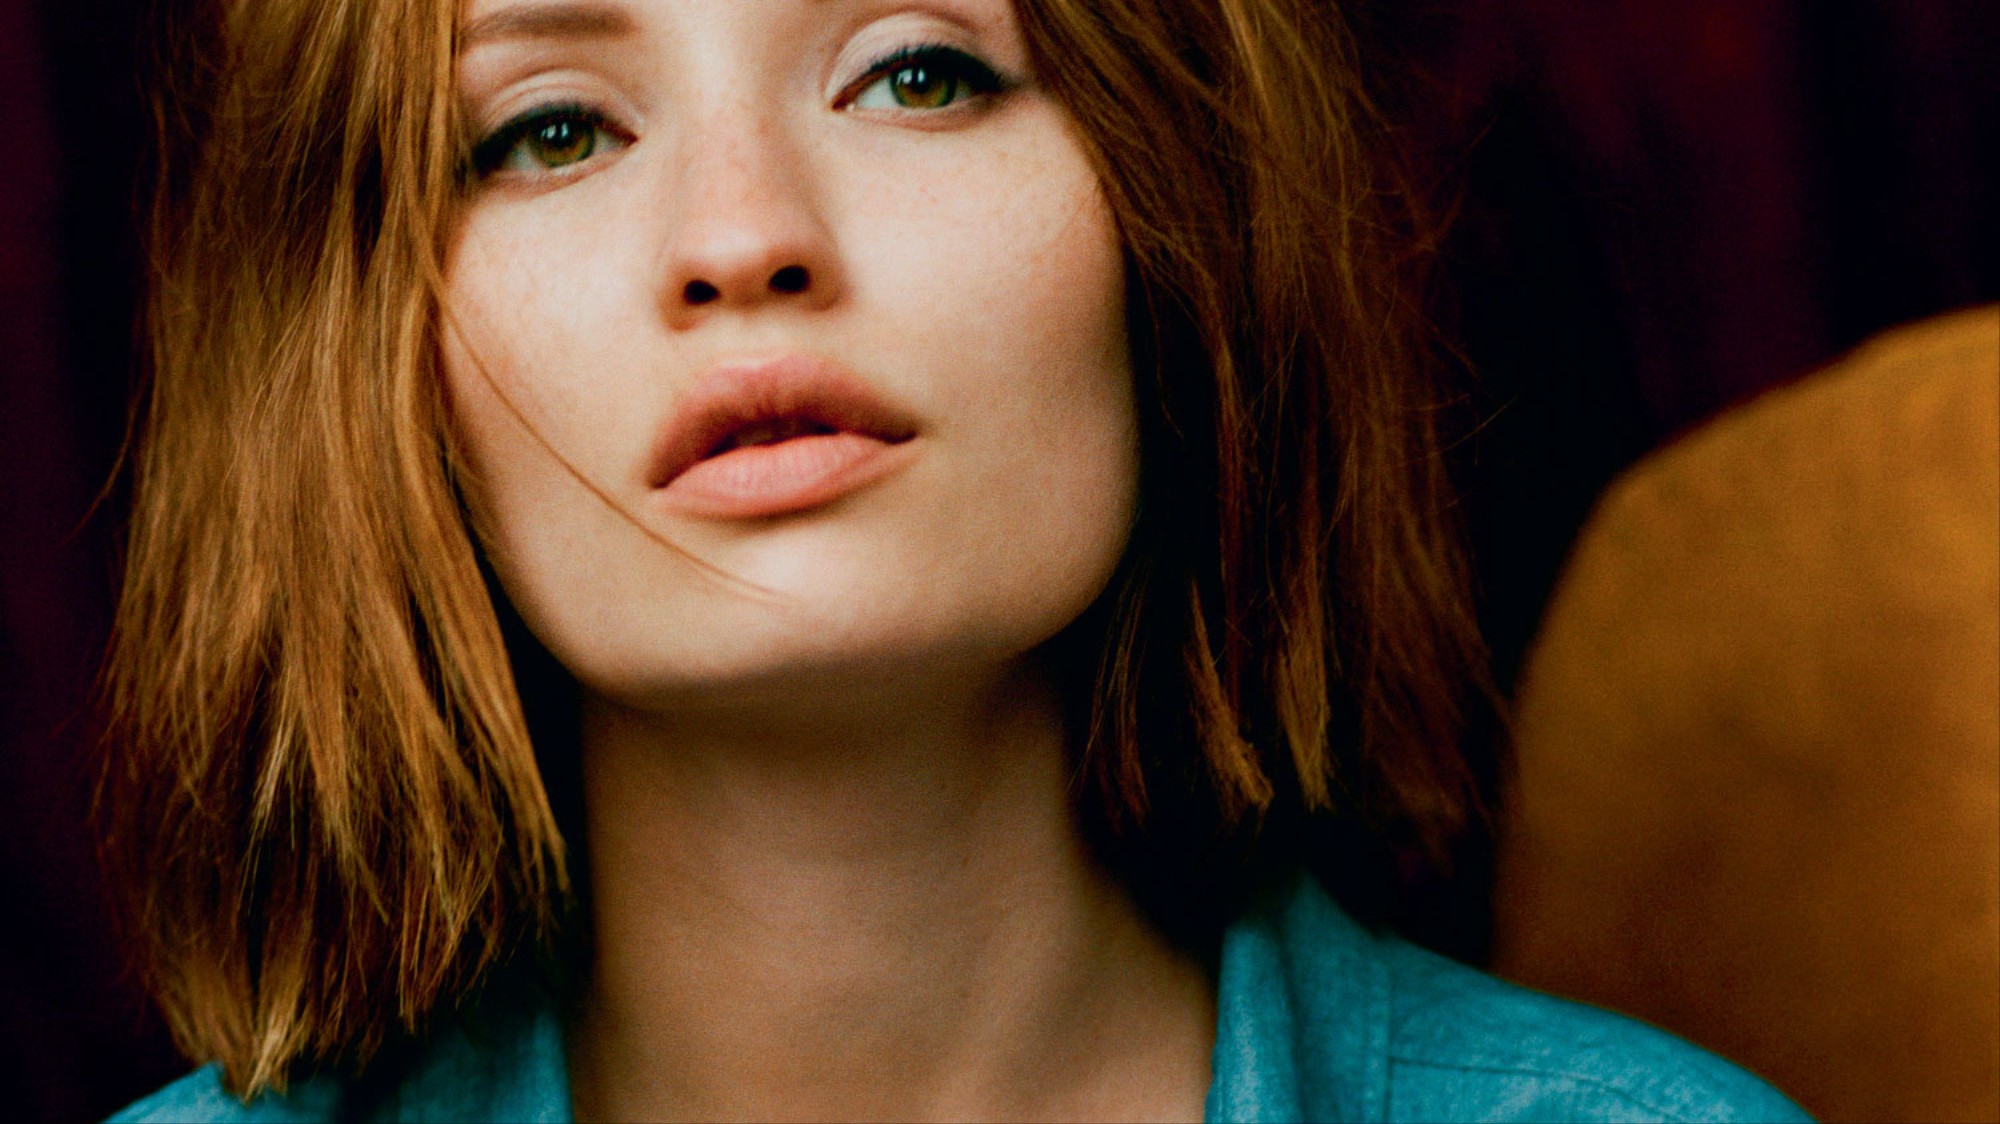 Emily browning hot pics